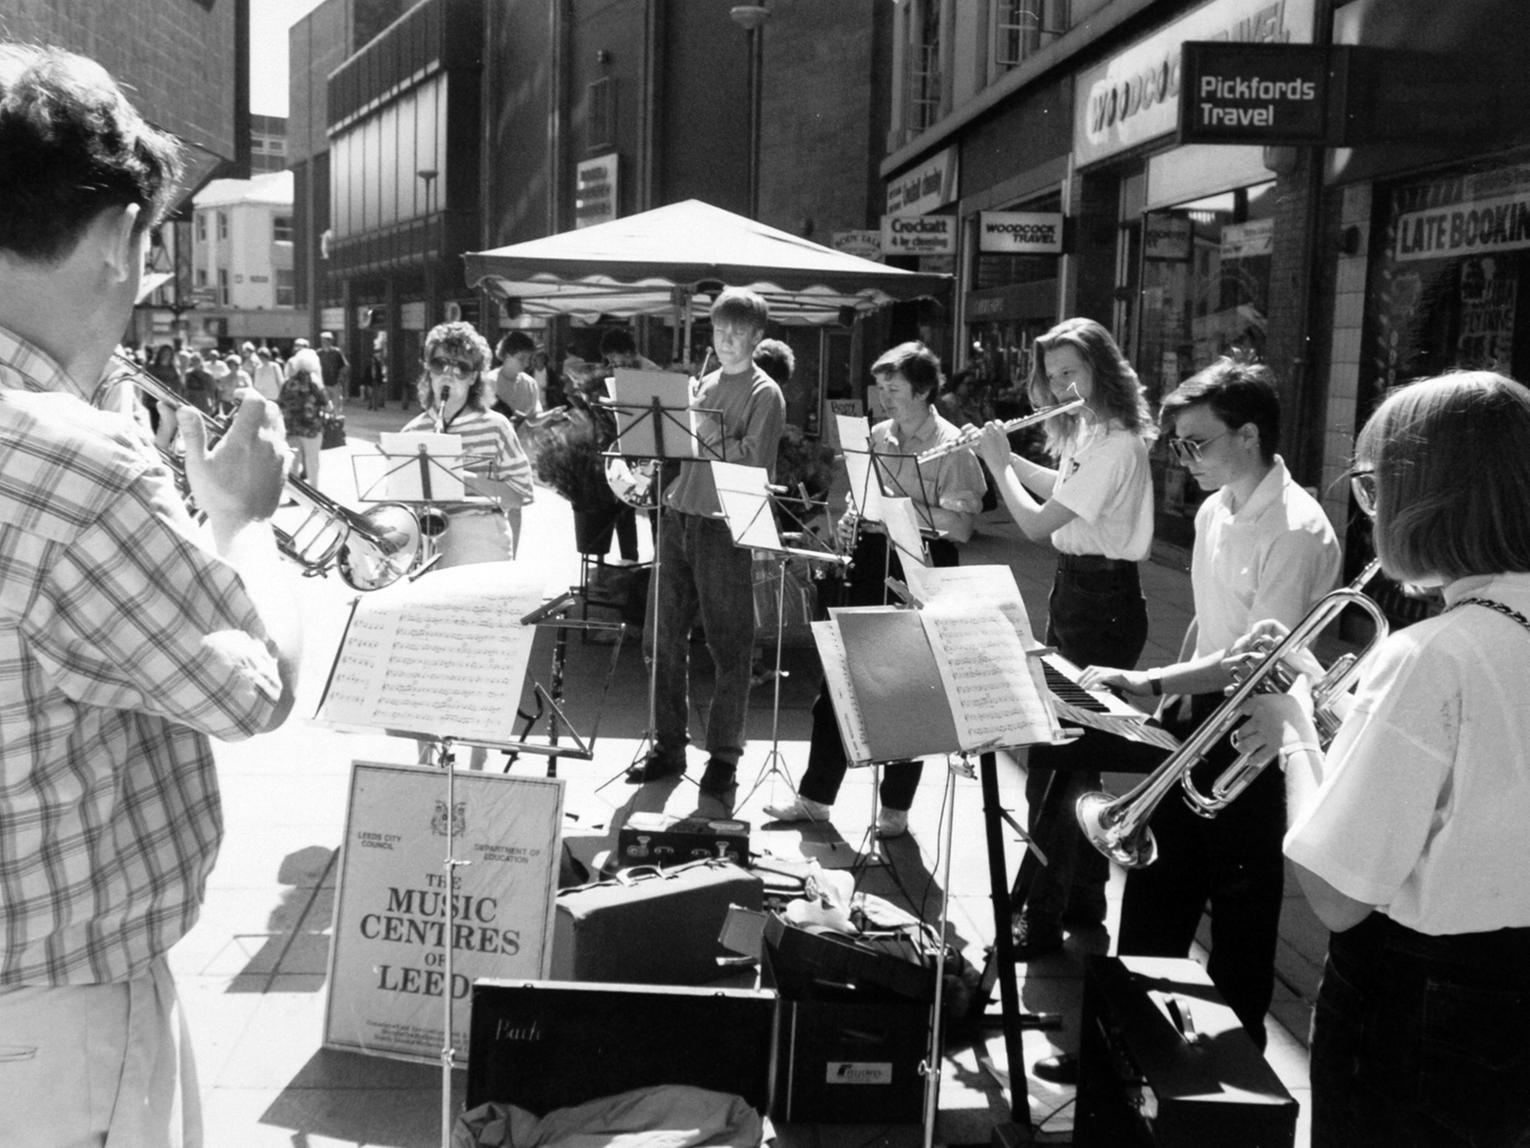 The shopping precincts of Leeds were alive with the sound of music when dozens of musicians took to the streets for a 'busking day'.